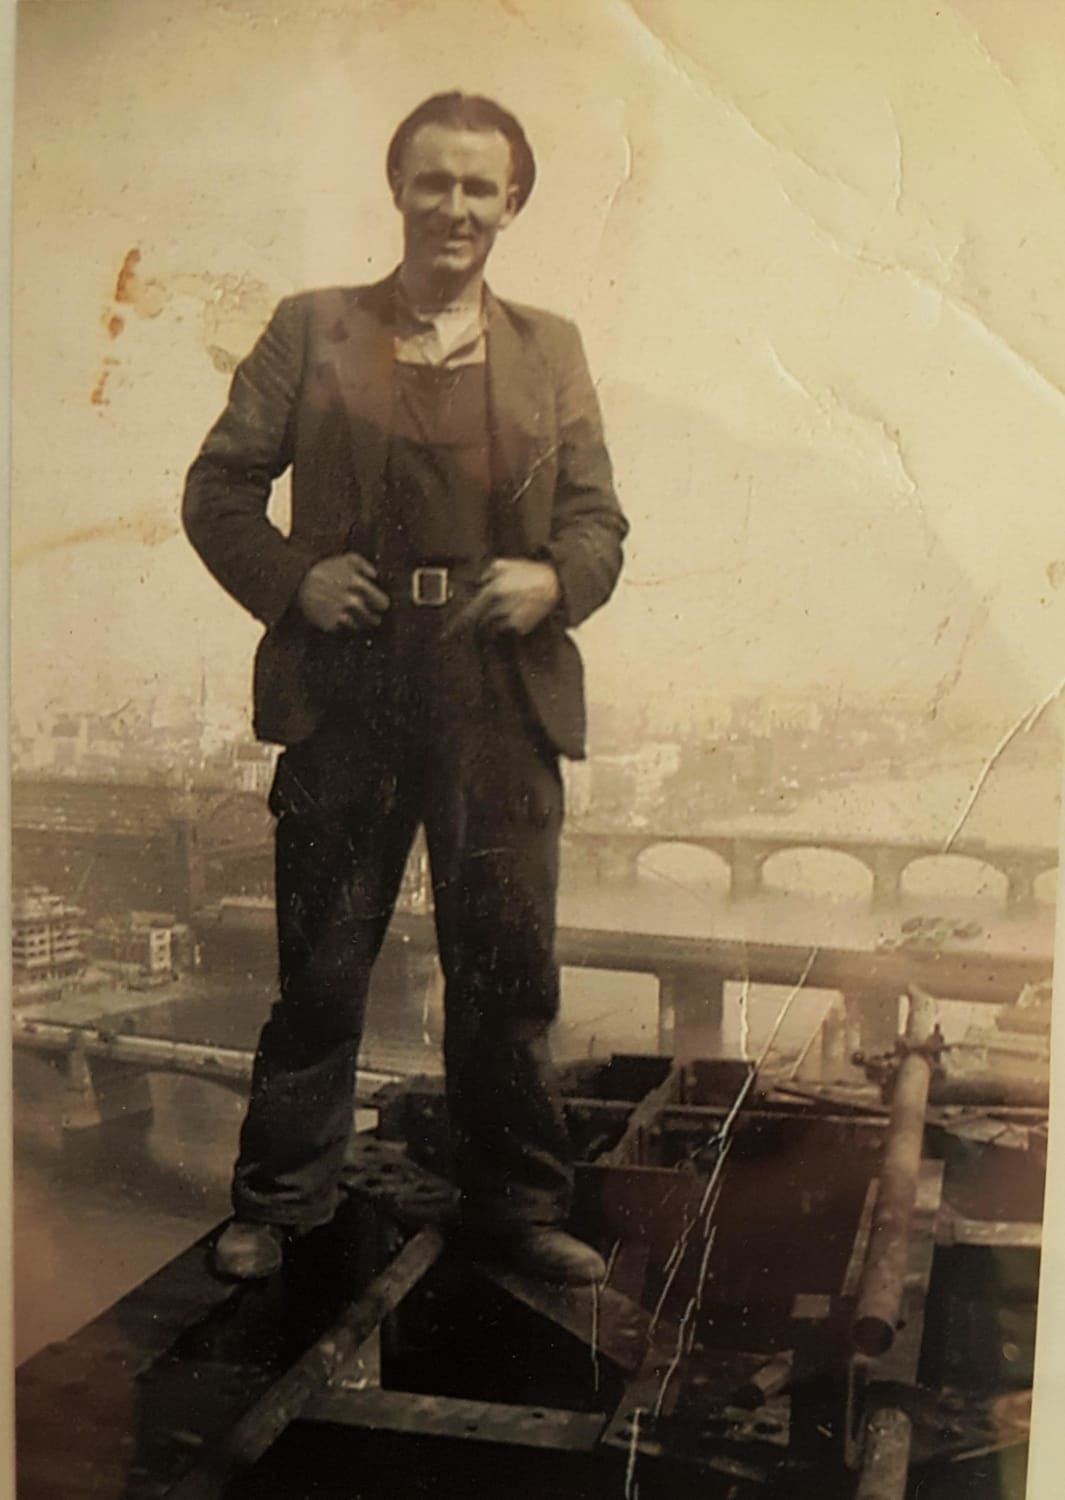 My grandfather atop (what I think is) the chimney of the Bankside power station in London during the early 1950s. He also worked on the Battersea power station chimneys.